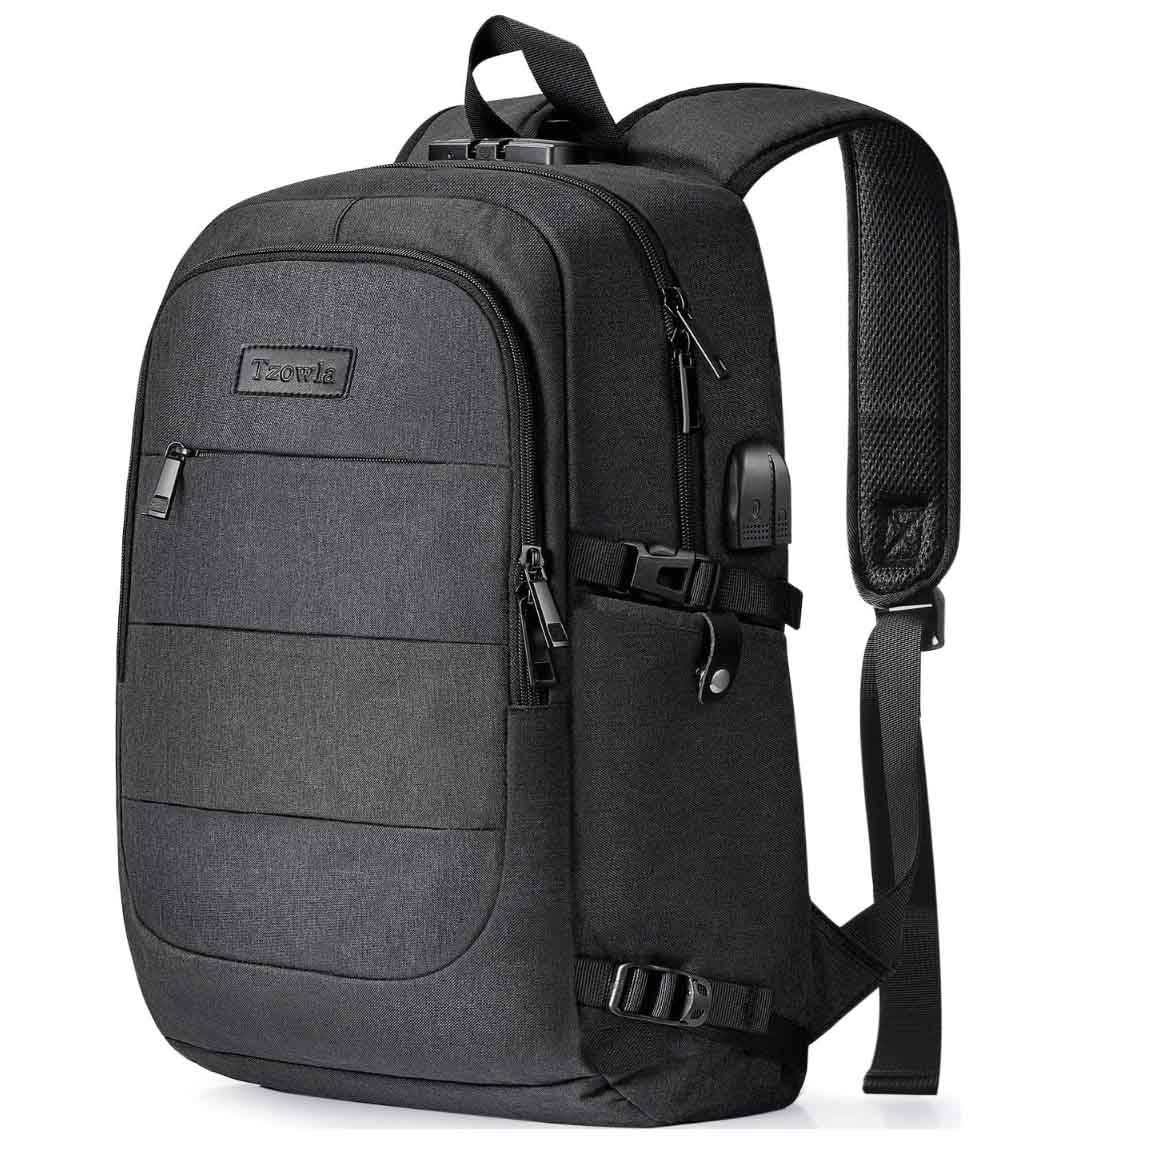 Side view of grey laptop backpack